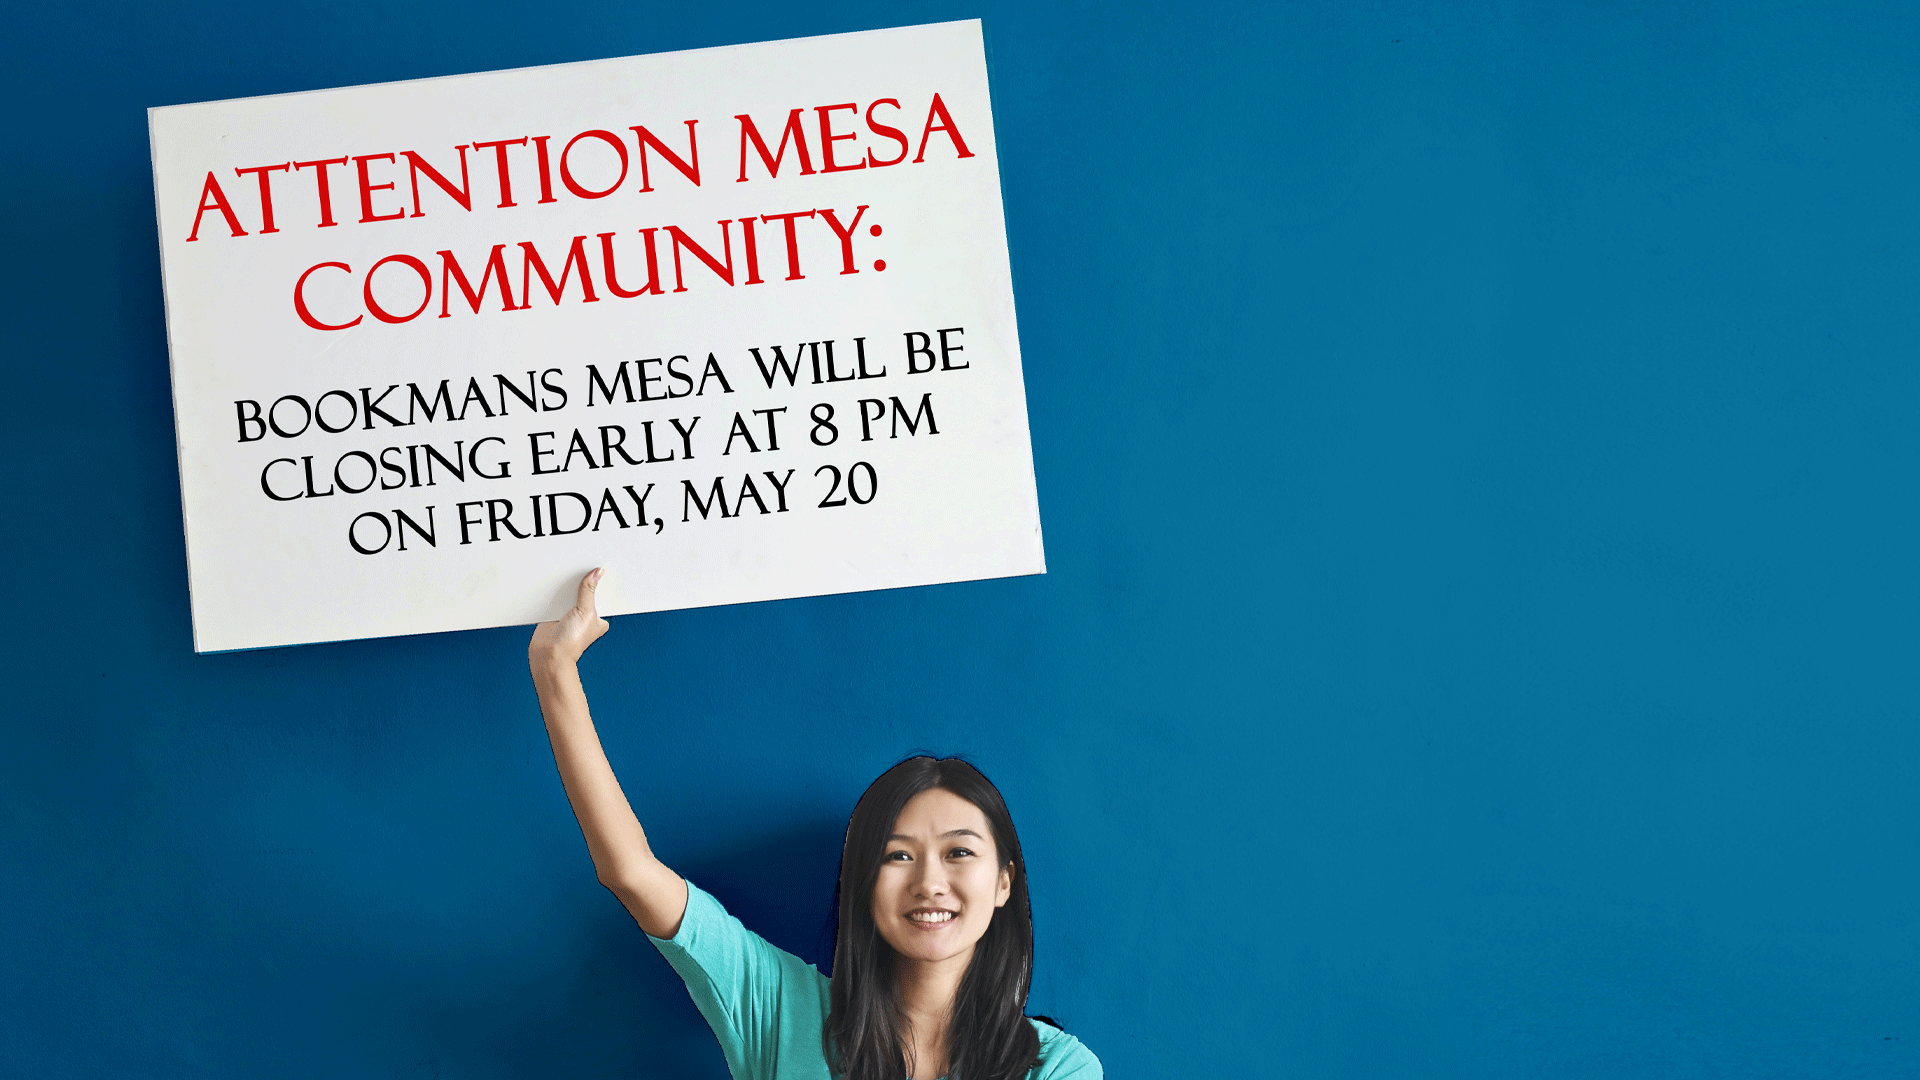 woman holding sign that reads attention mesa community: bookmans mesa is closing early on Friday, may 20